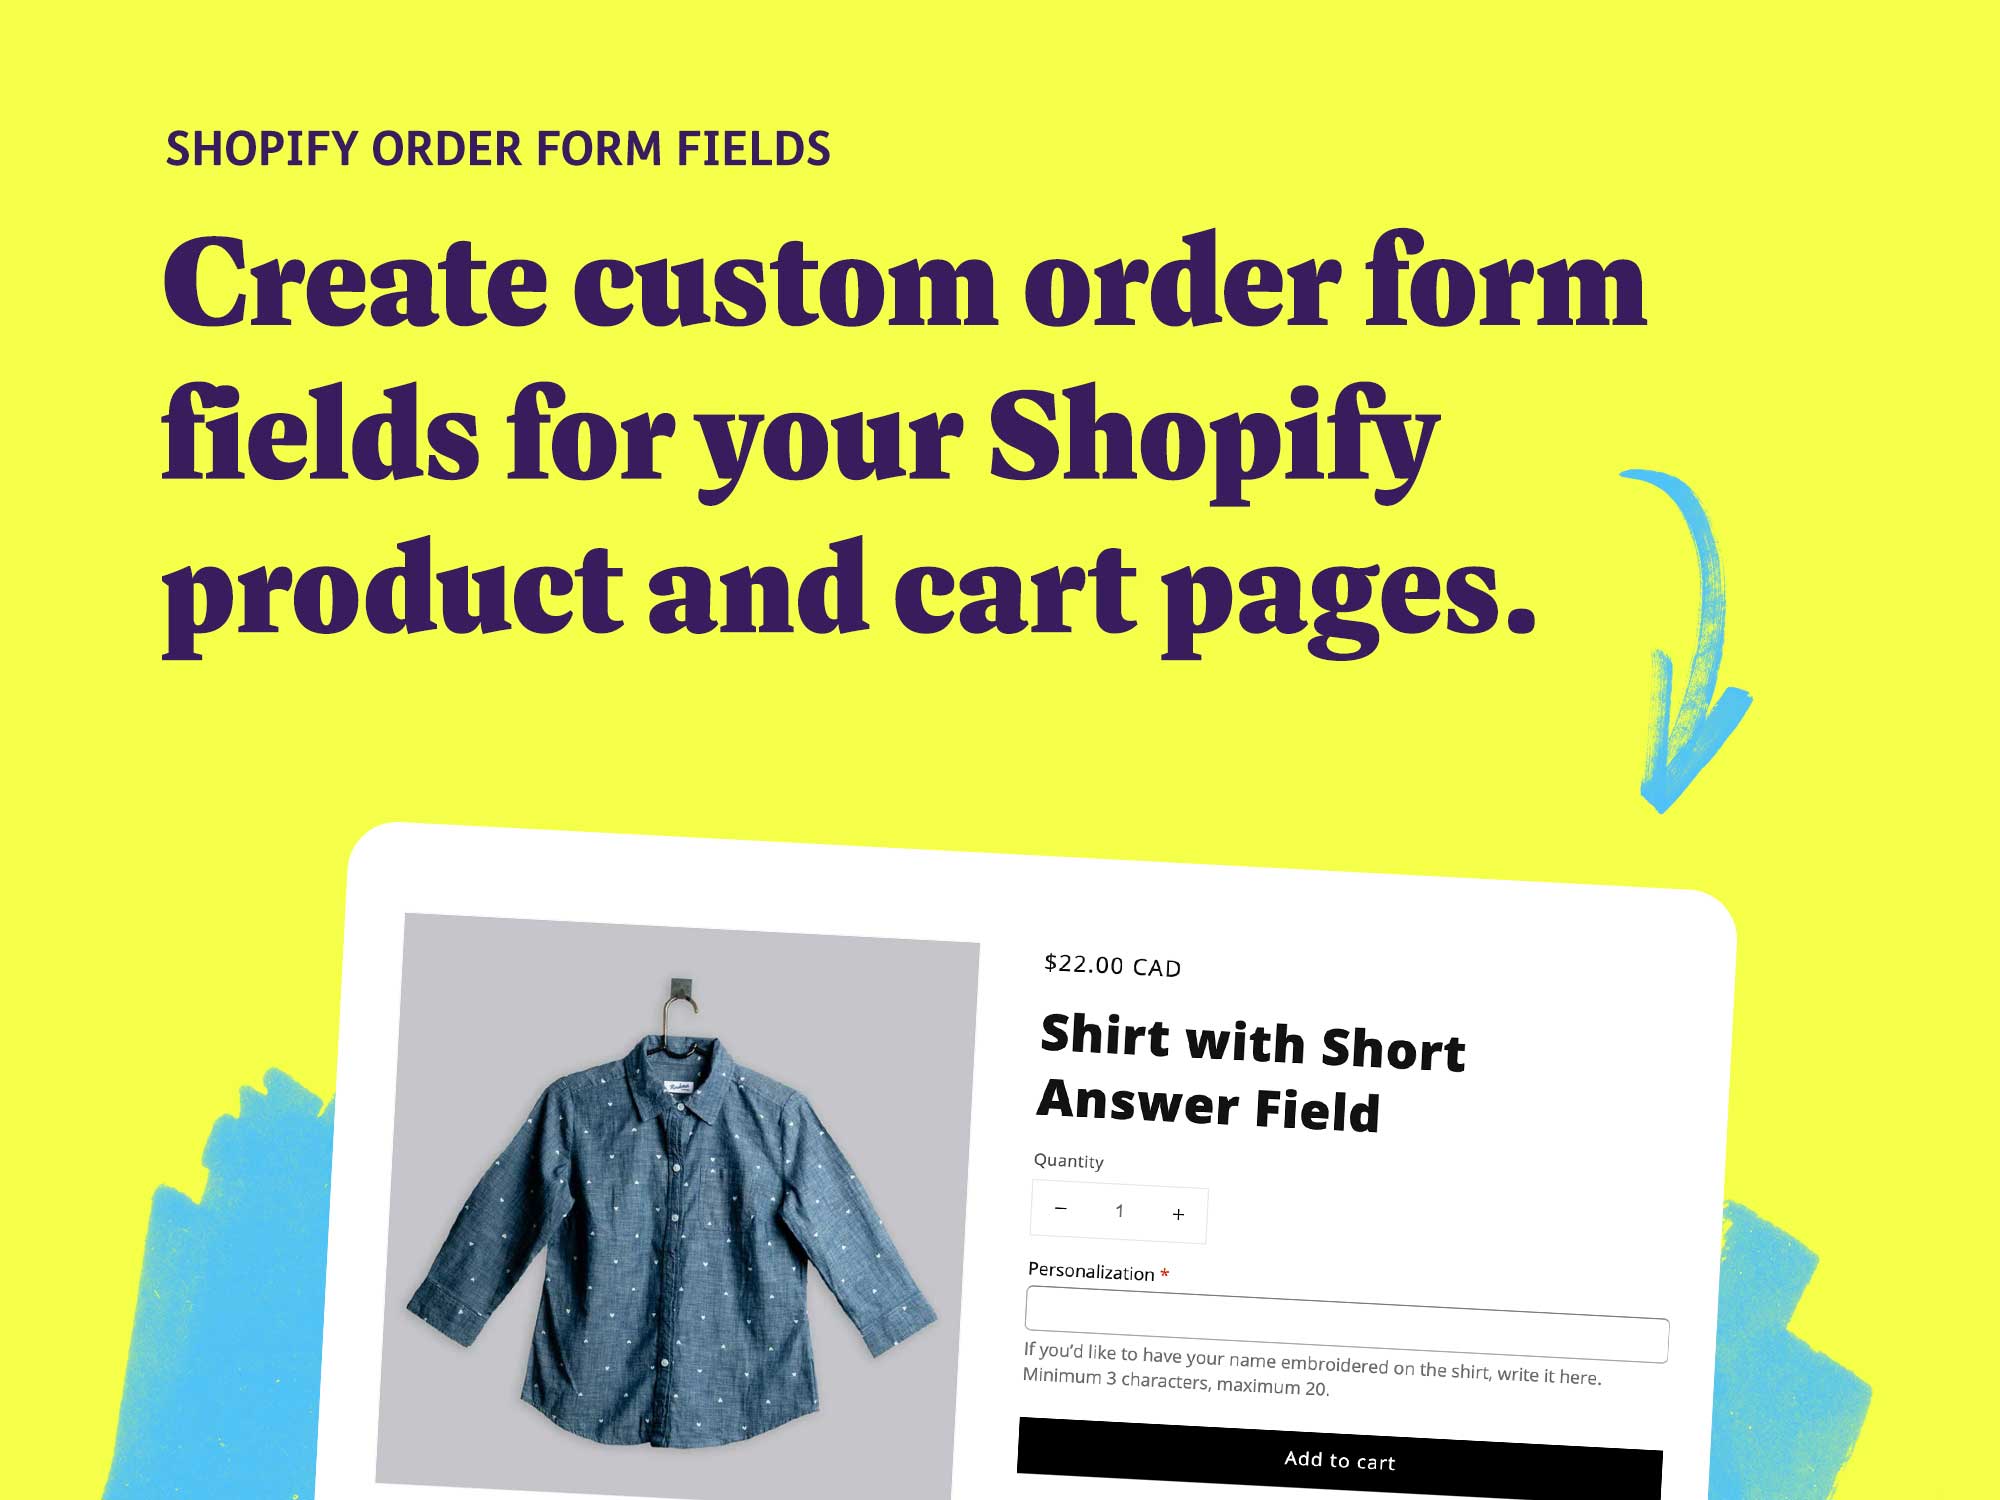 Shopify order form fields: Create custom order form fields for your Shopify product and cart pages.